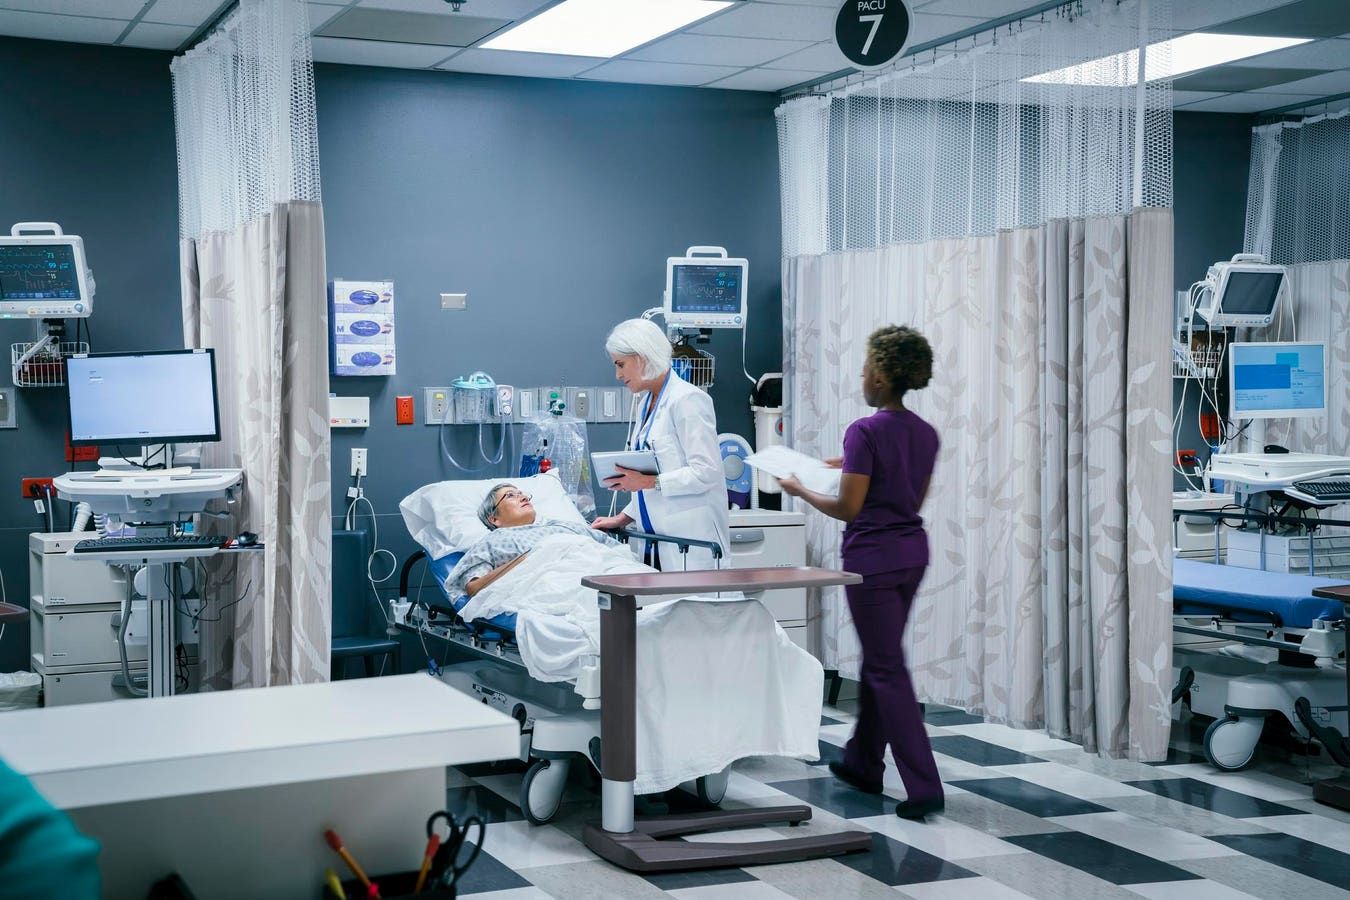 The U.S. Health System Should Focus On Pre-Acute Care, Not Post-Acute